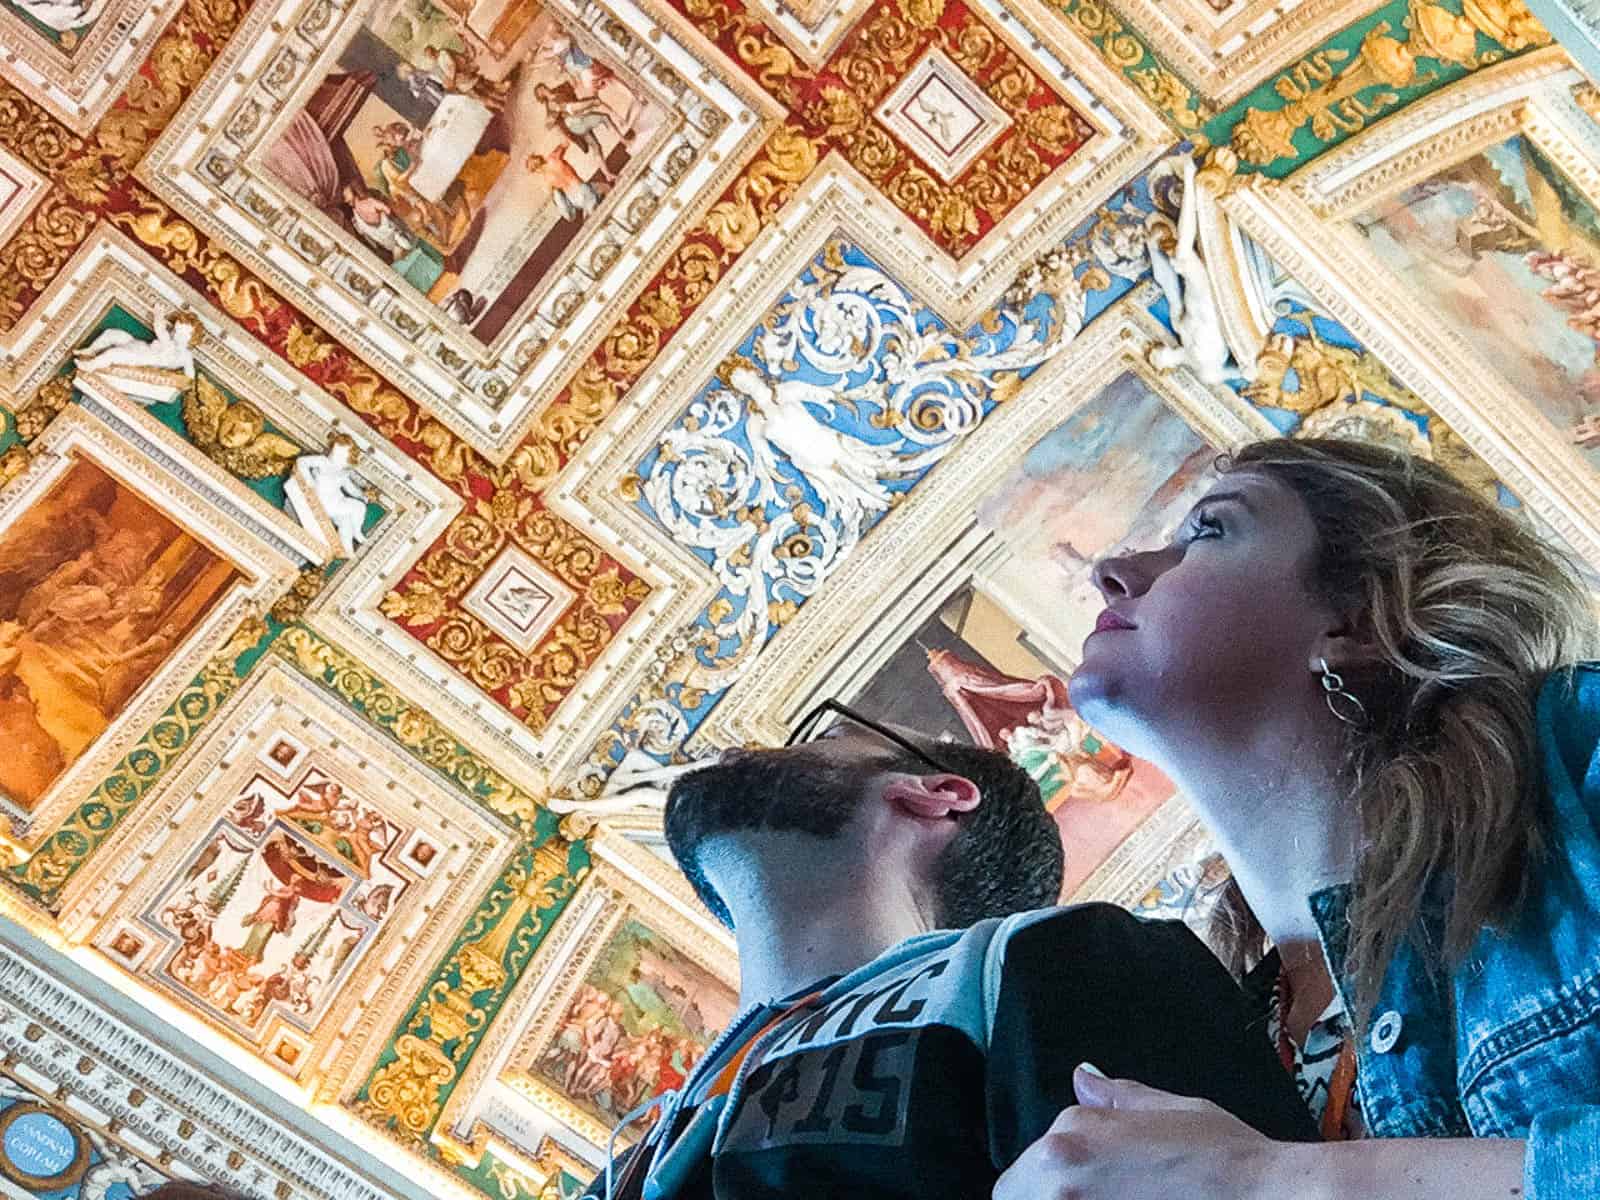 Two people looking up at the ceiling in the hallway of maps at the vatican in rome